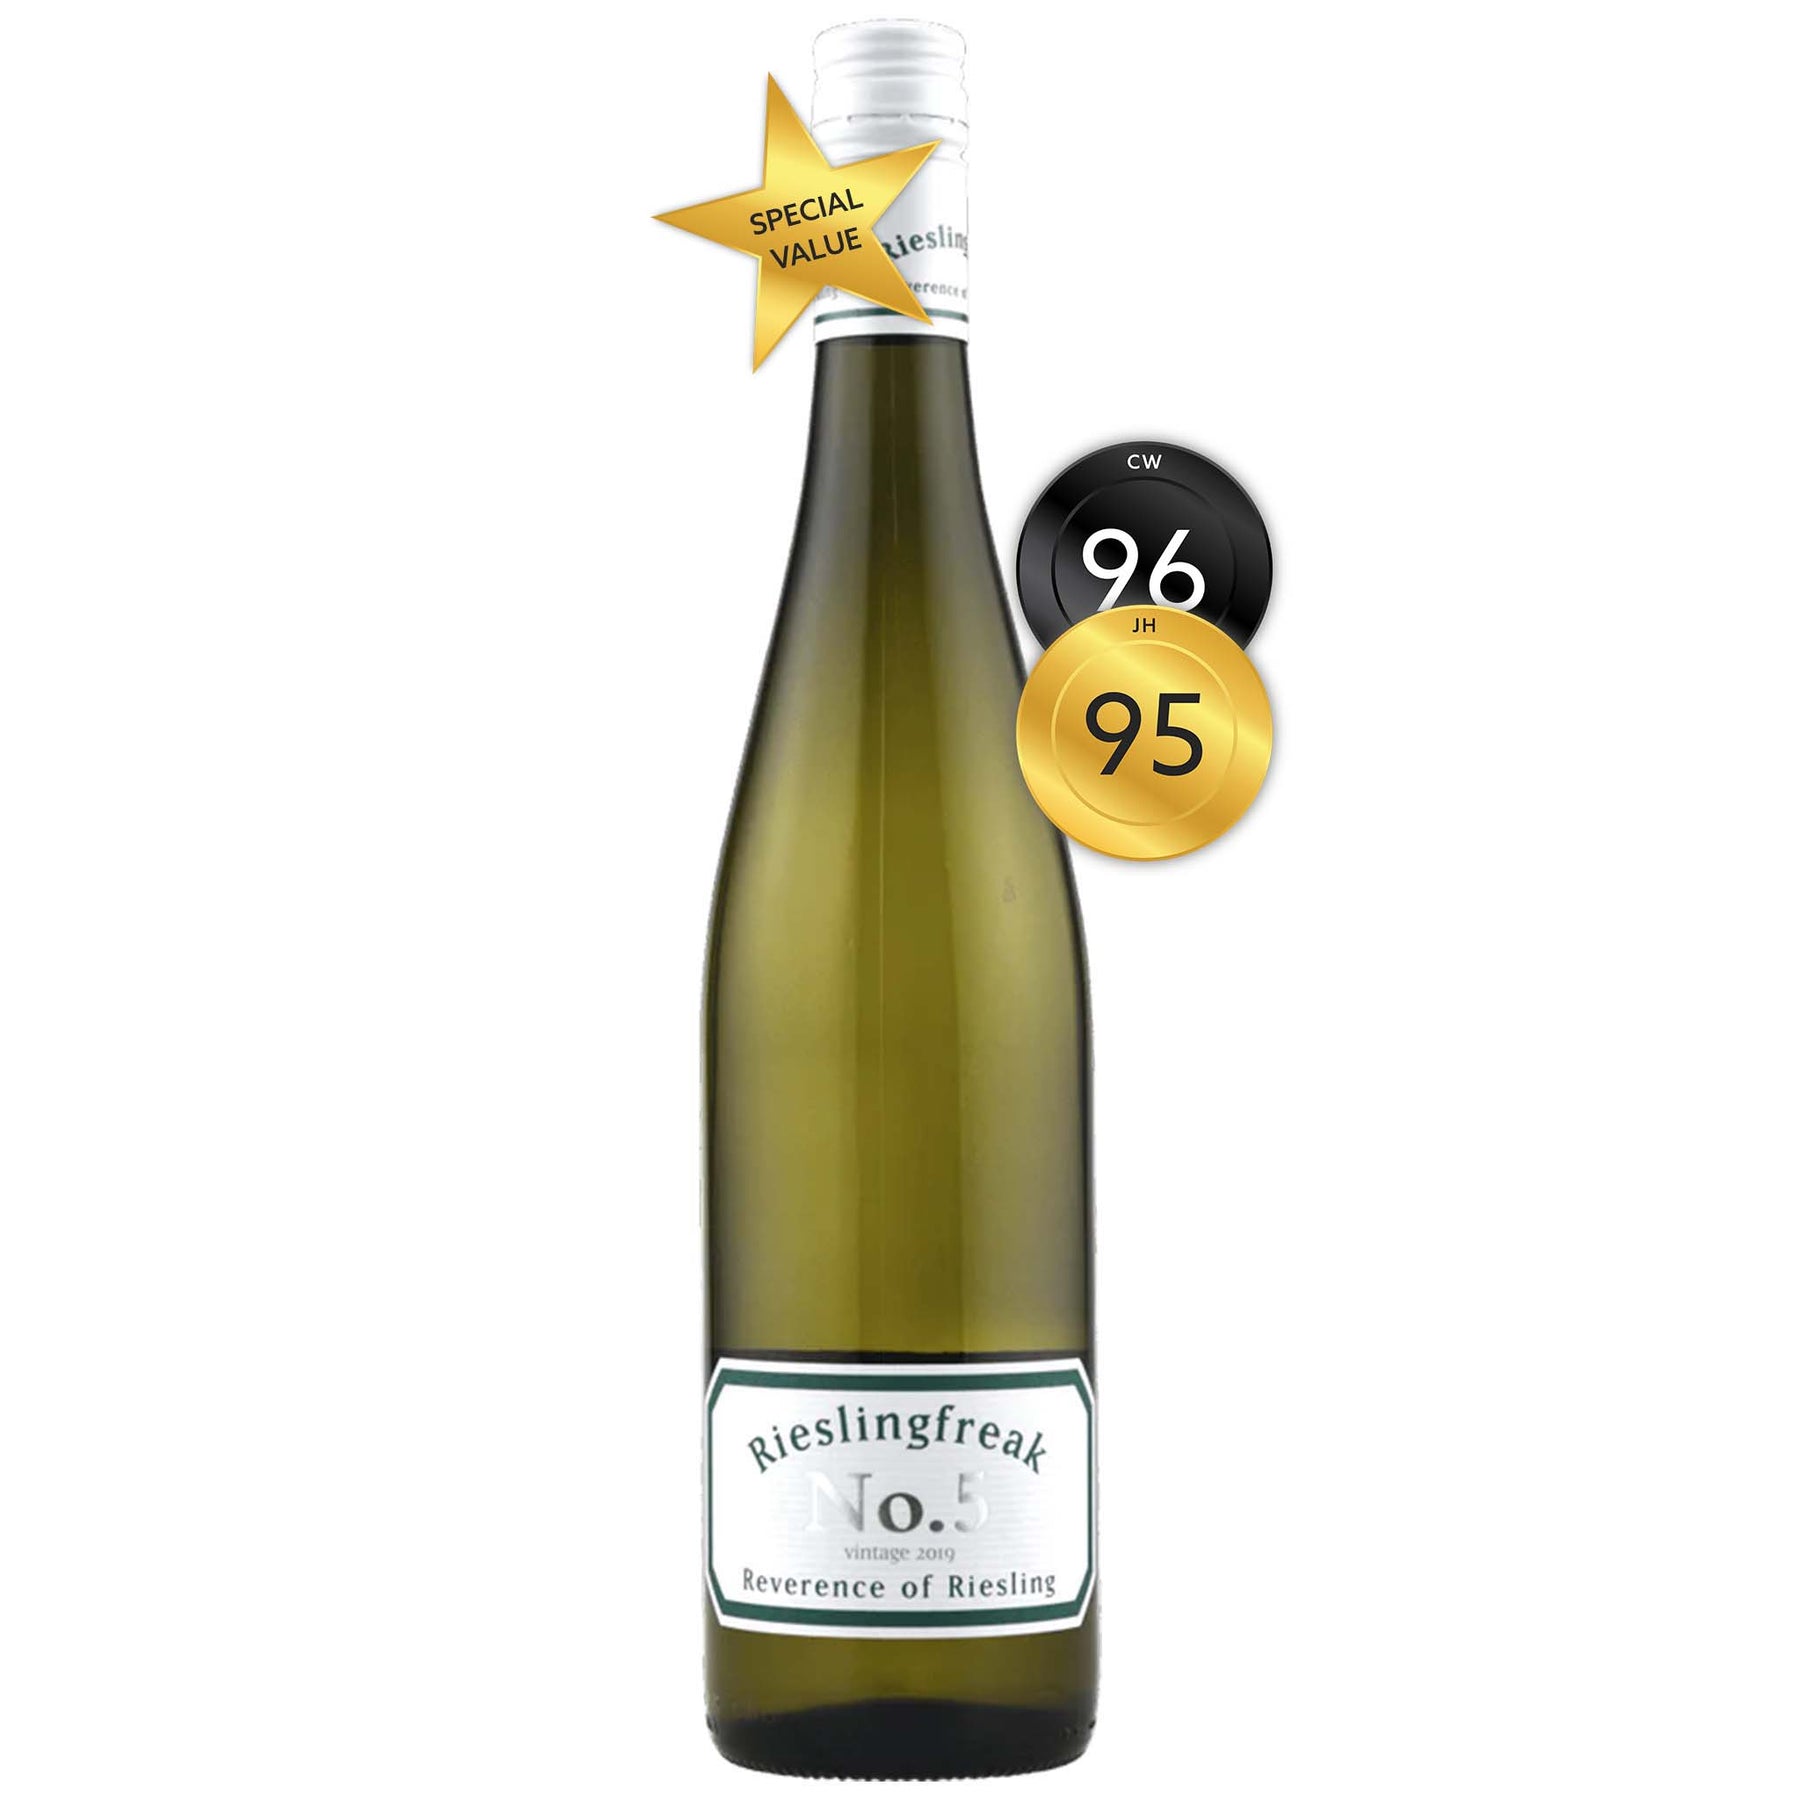 Rieslingfreak No 5 Clare Valley Off Dry Riesling 2019